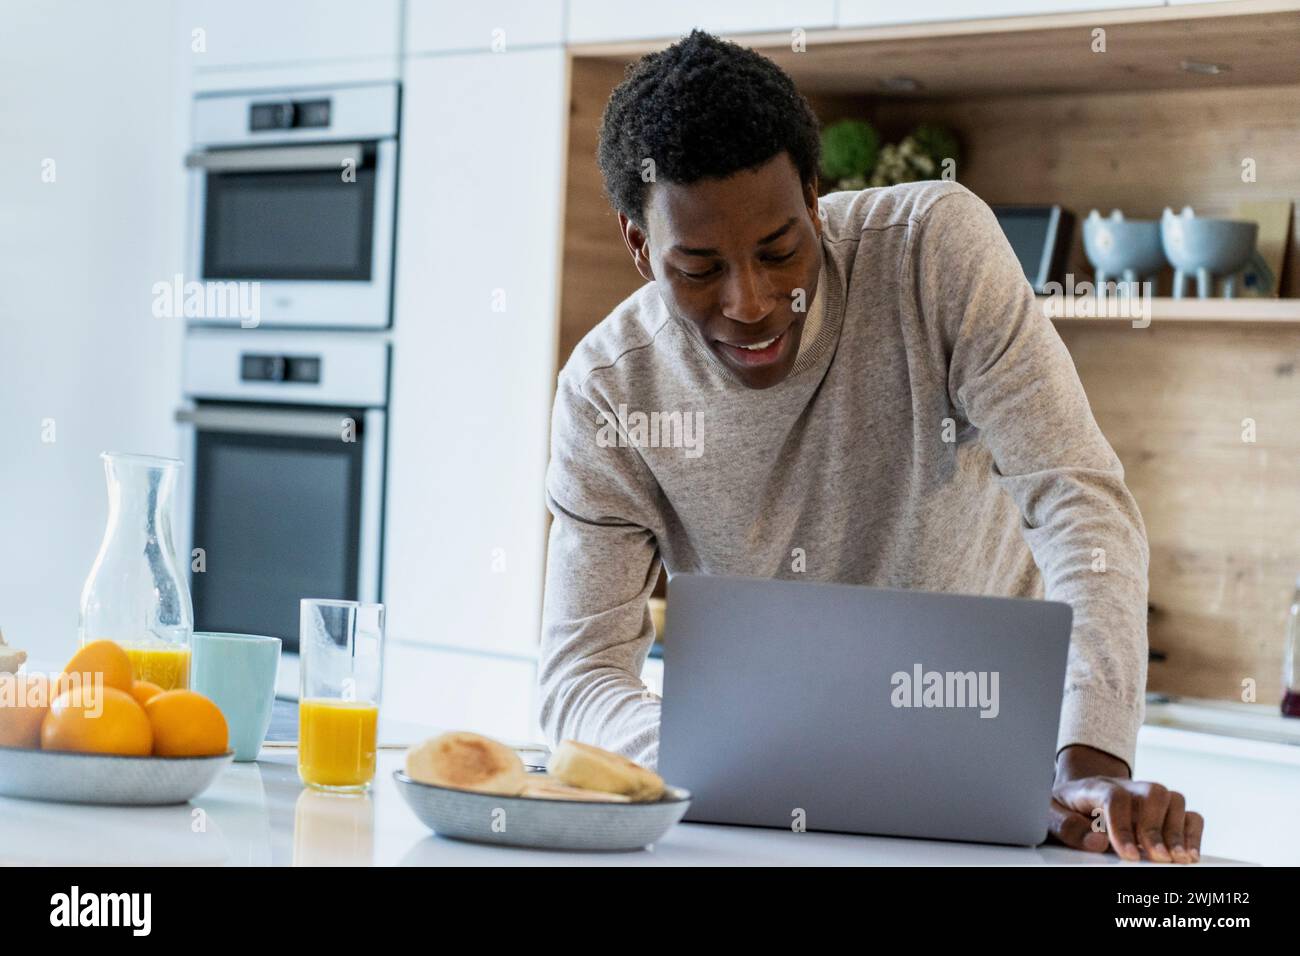 Adult man using laptop while leaning on kitchen counter Stock Photo